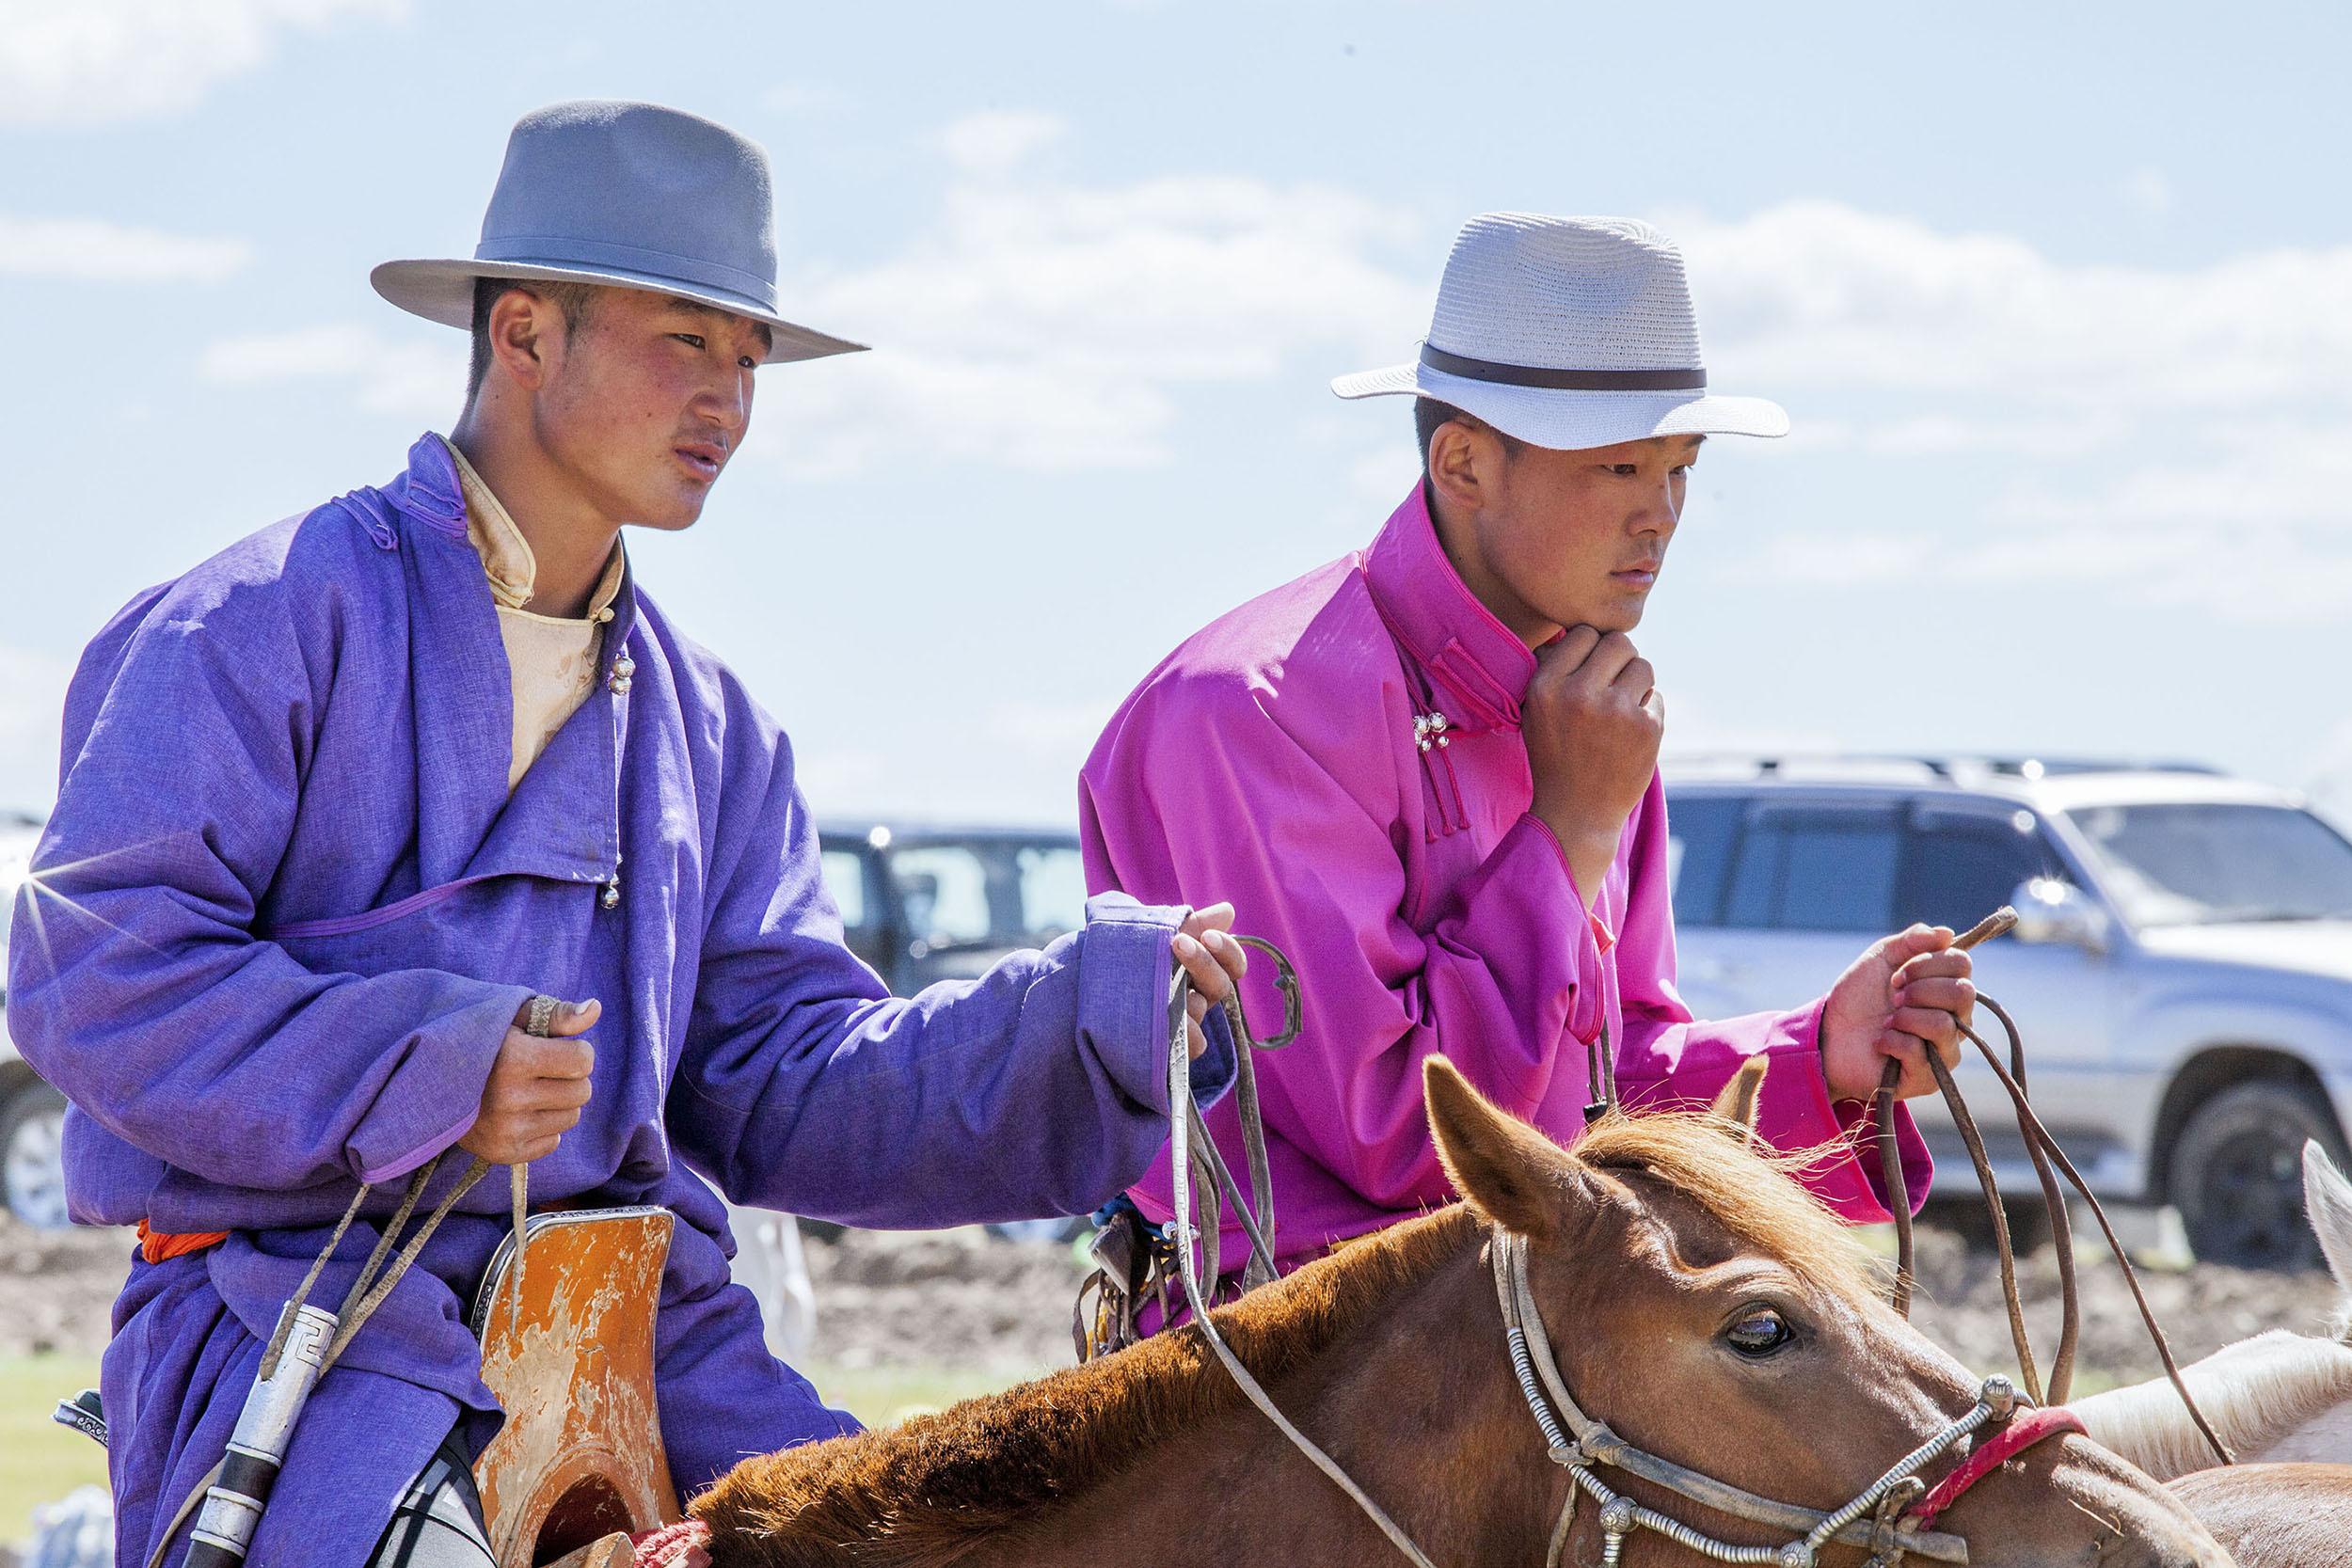 brightly adorned Mongolian horse riders wearing deel